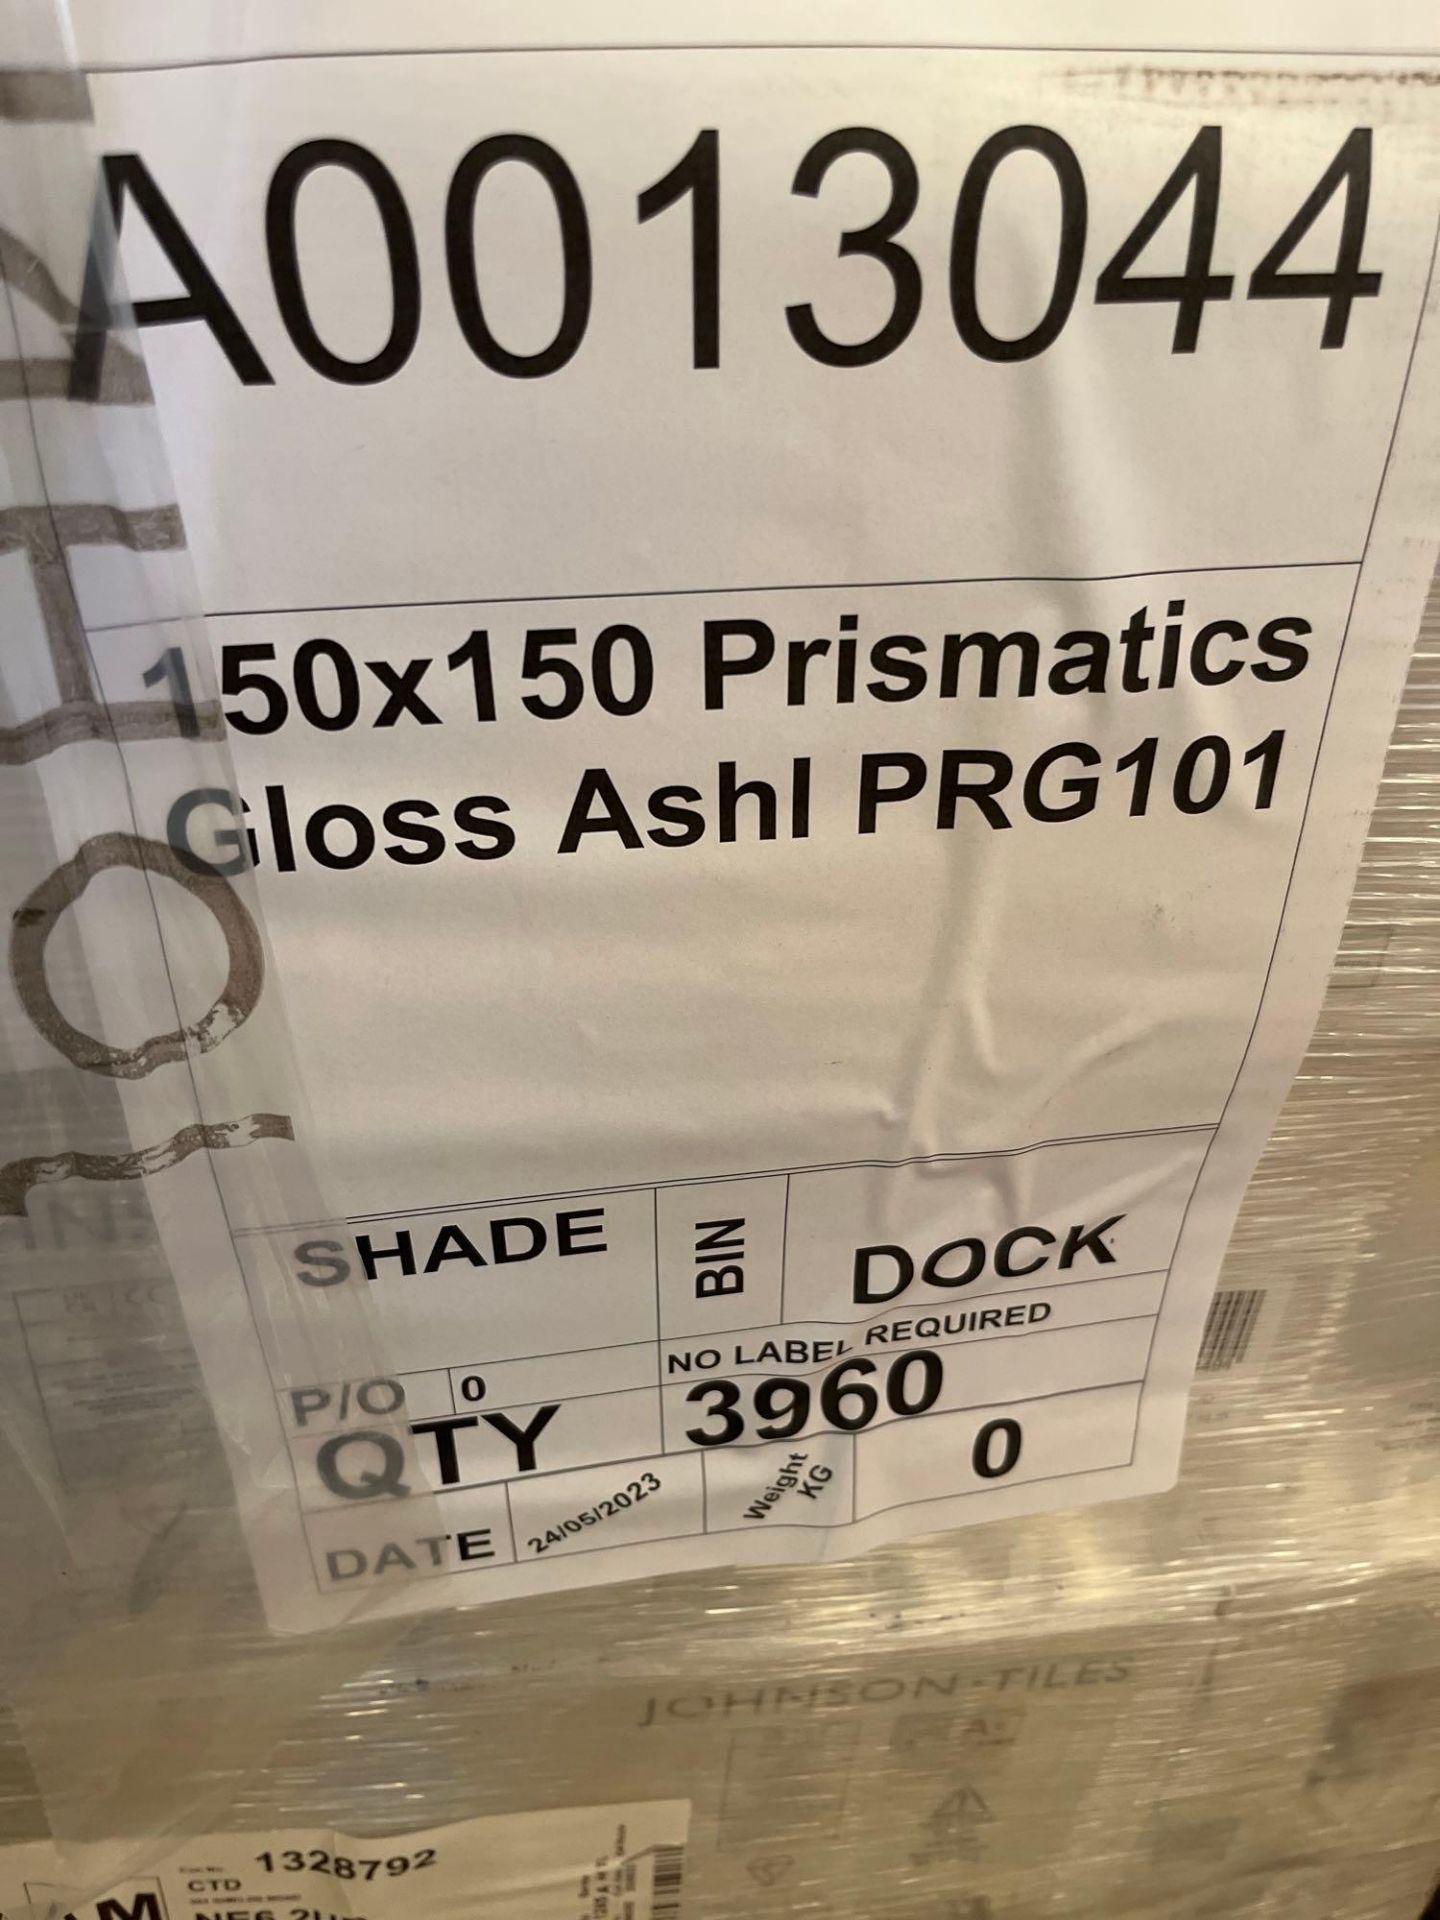 90 Boxes of 150 x 150 HRJ Prismatic Gloss White Tiles on 1 Pallet - Image 2 of 2